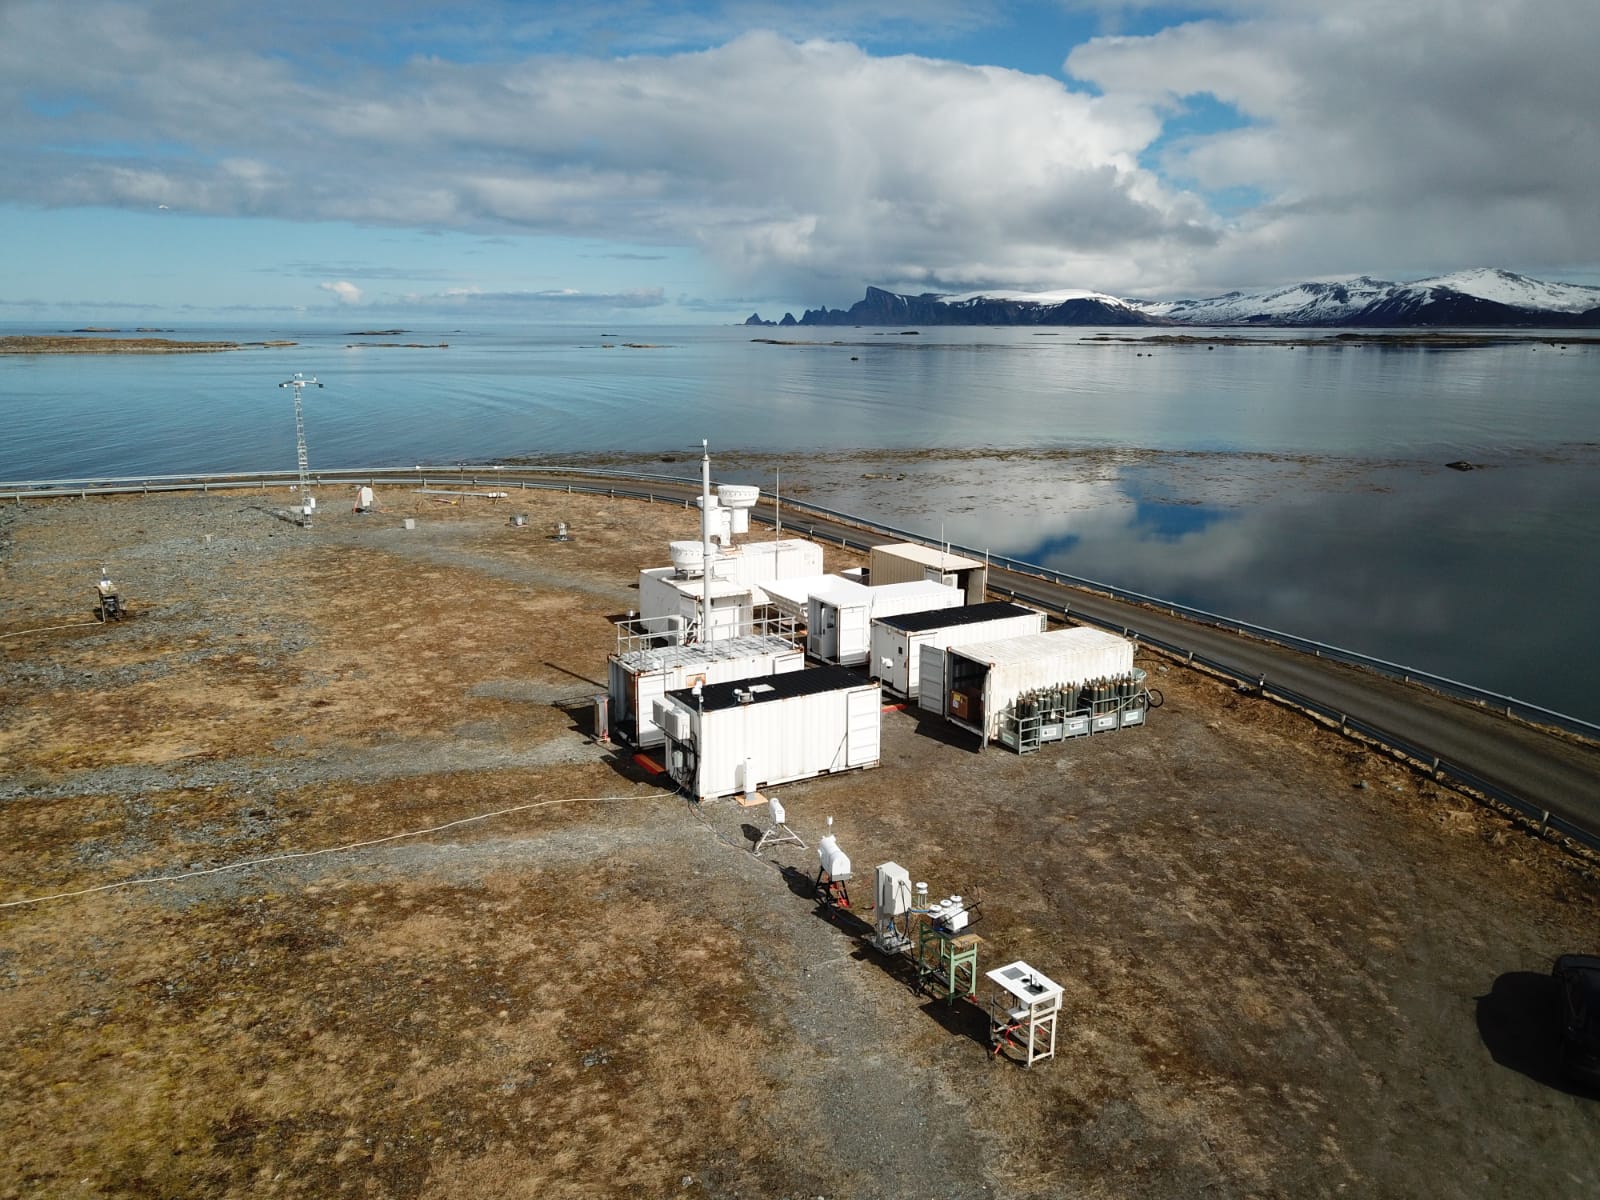 The first ARM Mobile Facility (AMF1), above, pulled in COMBLE data from a fishing village within the Arctic Circle on the island of Andøya. The ice edge of the Arctic is approximately 1,000 kilometers (620 miles) to the north. 